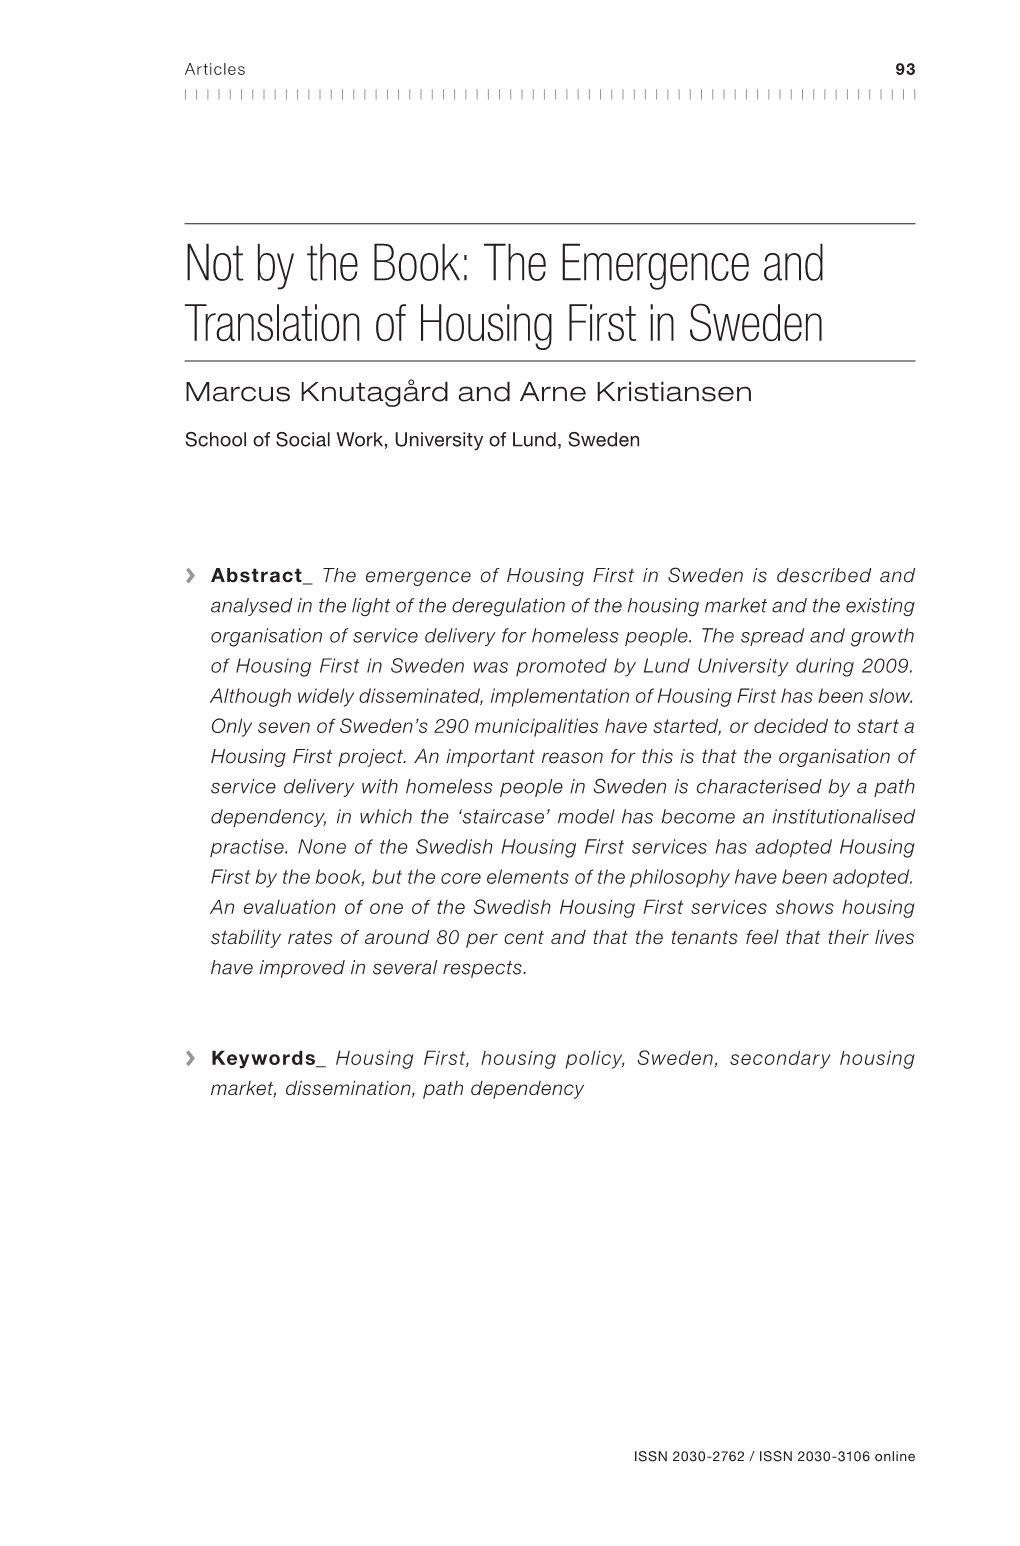 The Emergence and Translation of Housing First in Sweden Marcus Knutagård and Arne Kristiansen